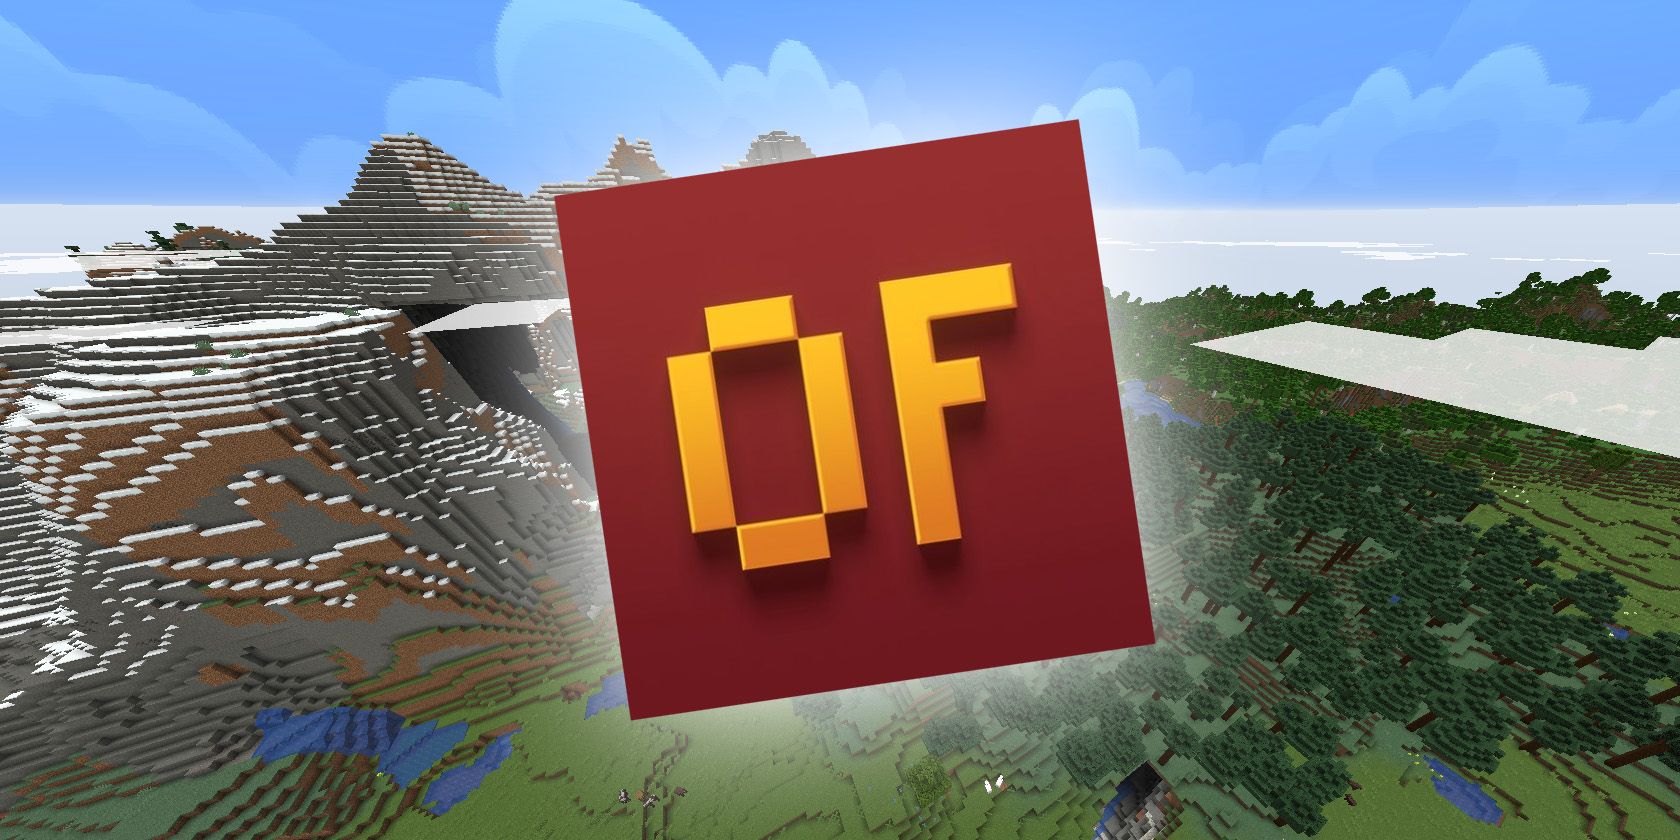 what version of java do you need for optifine mac